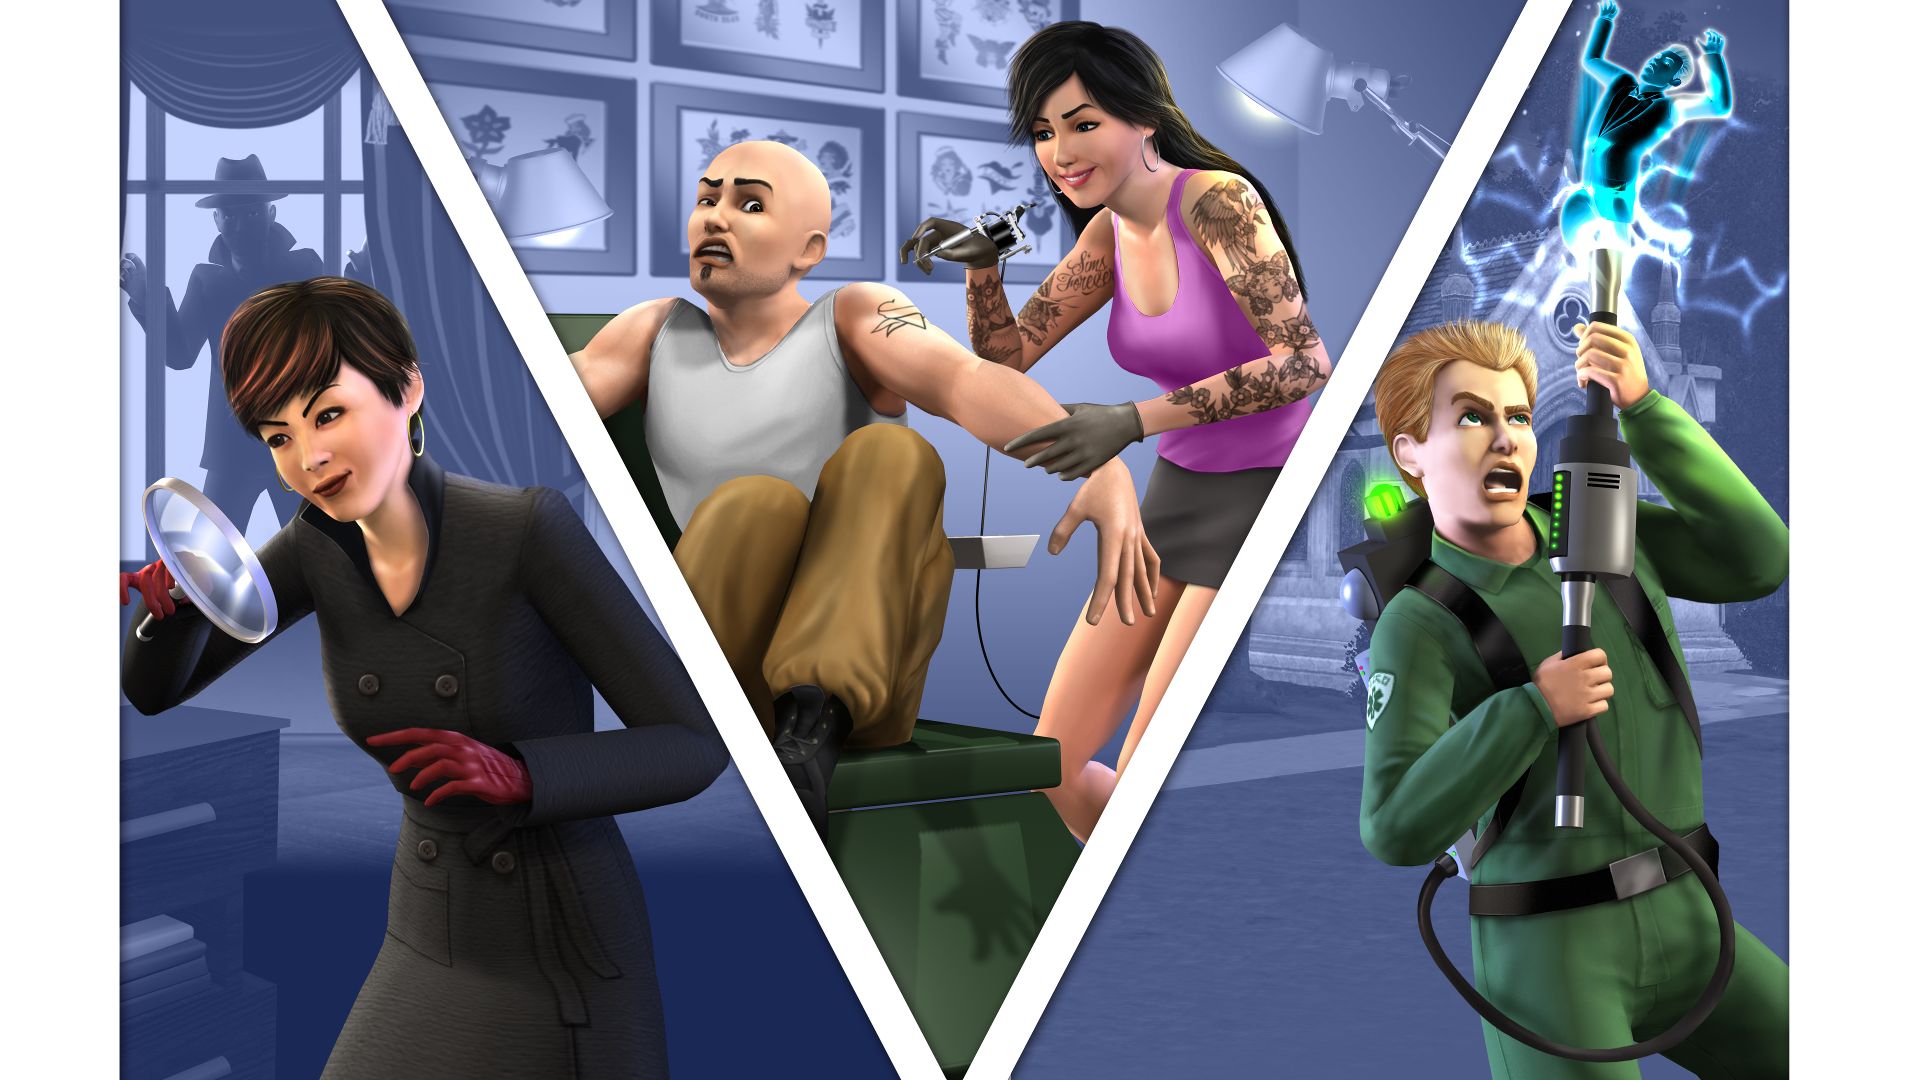 how to get sims 3 expansions free